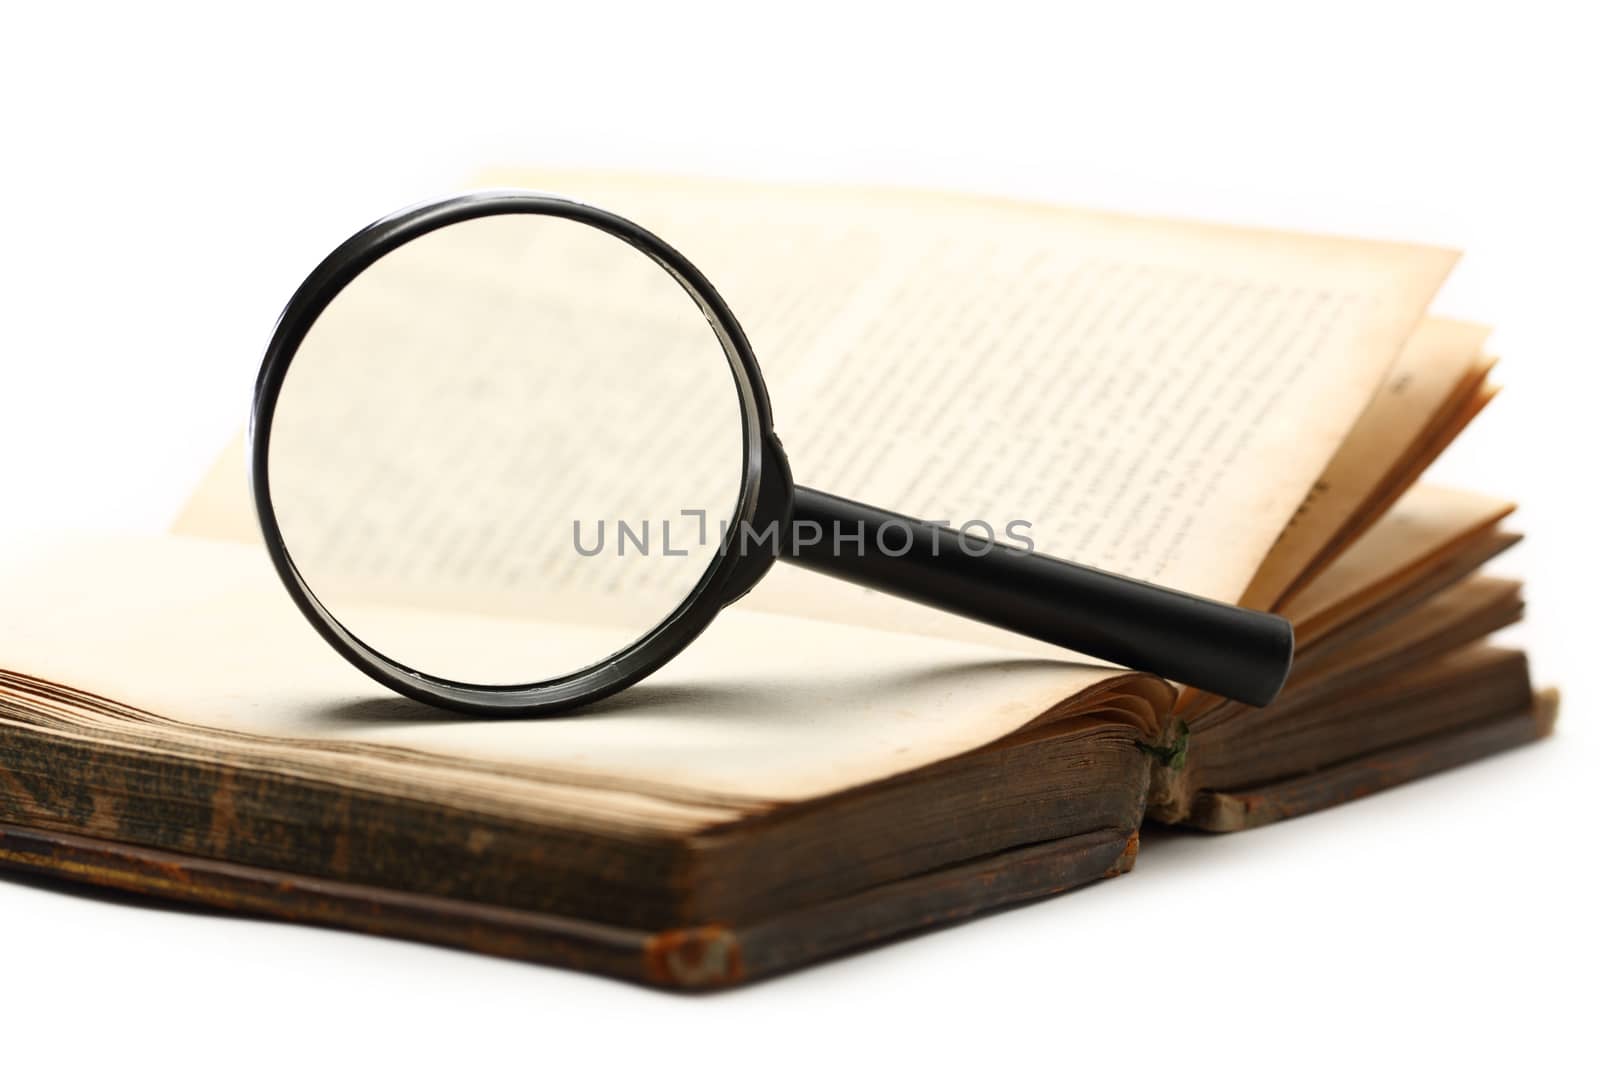 Magnifying glass and old book on the white background